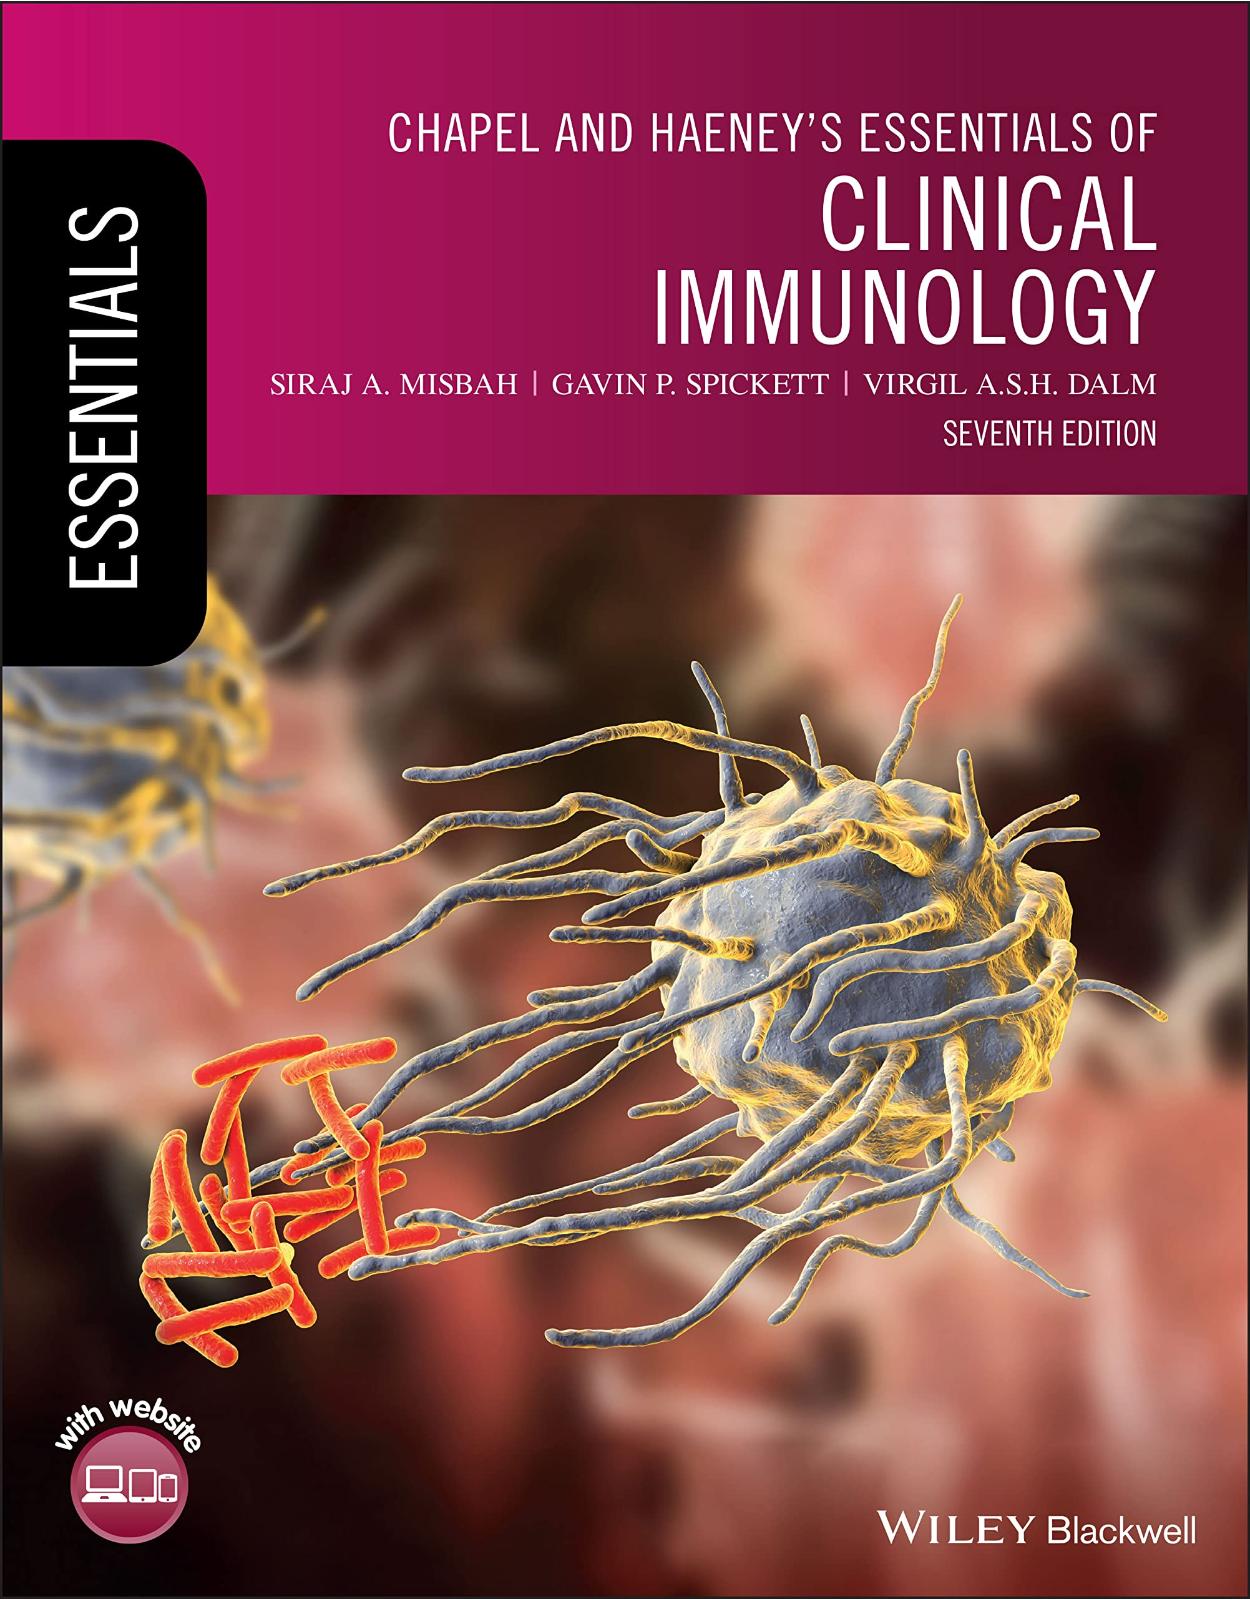 Chapel and Haeney′s Essentials of Clinical Immunol ogy, 7th Edition